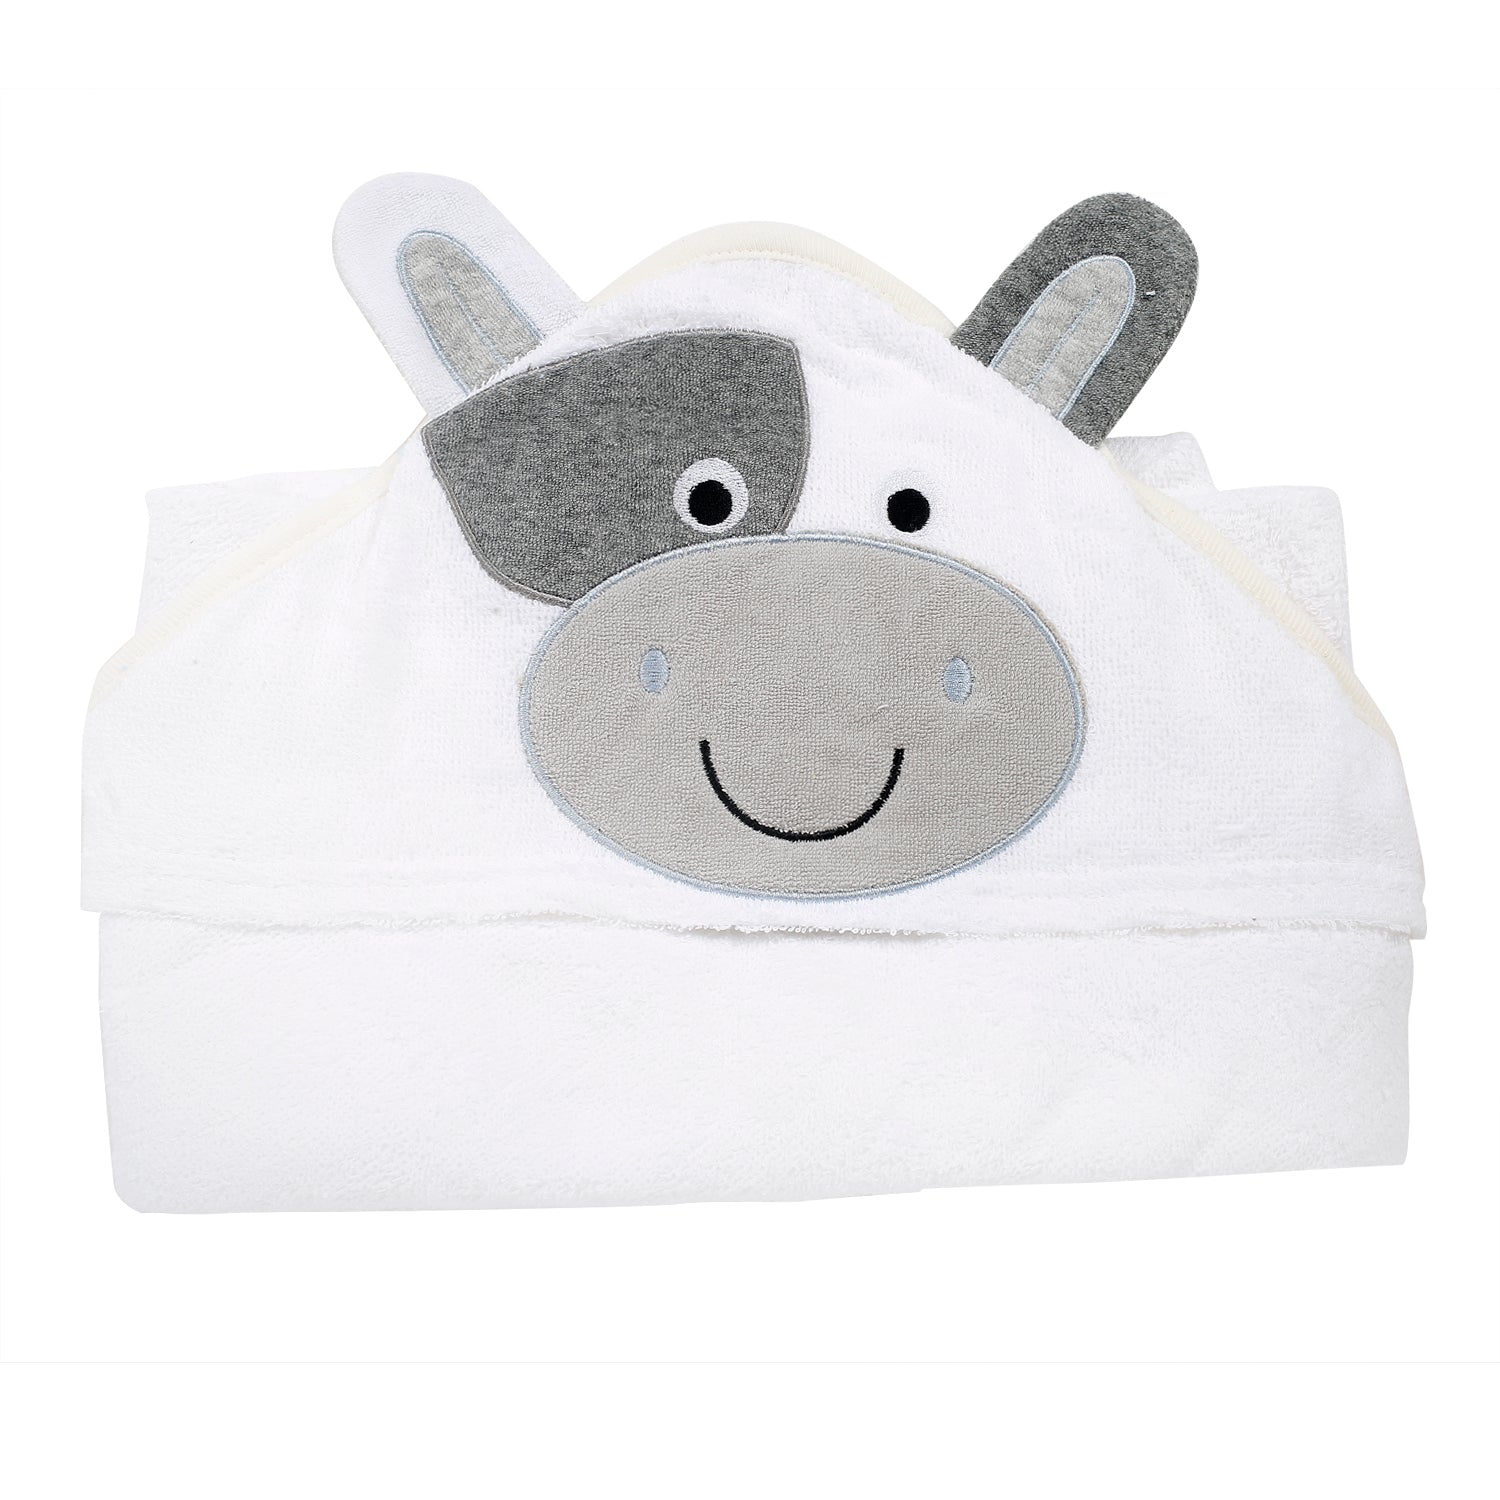 Mooing Cow White Hooded Towel - Baby Moo